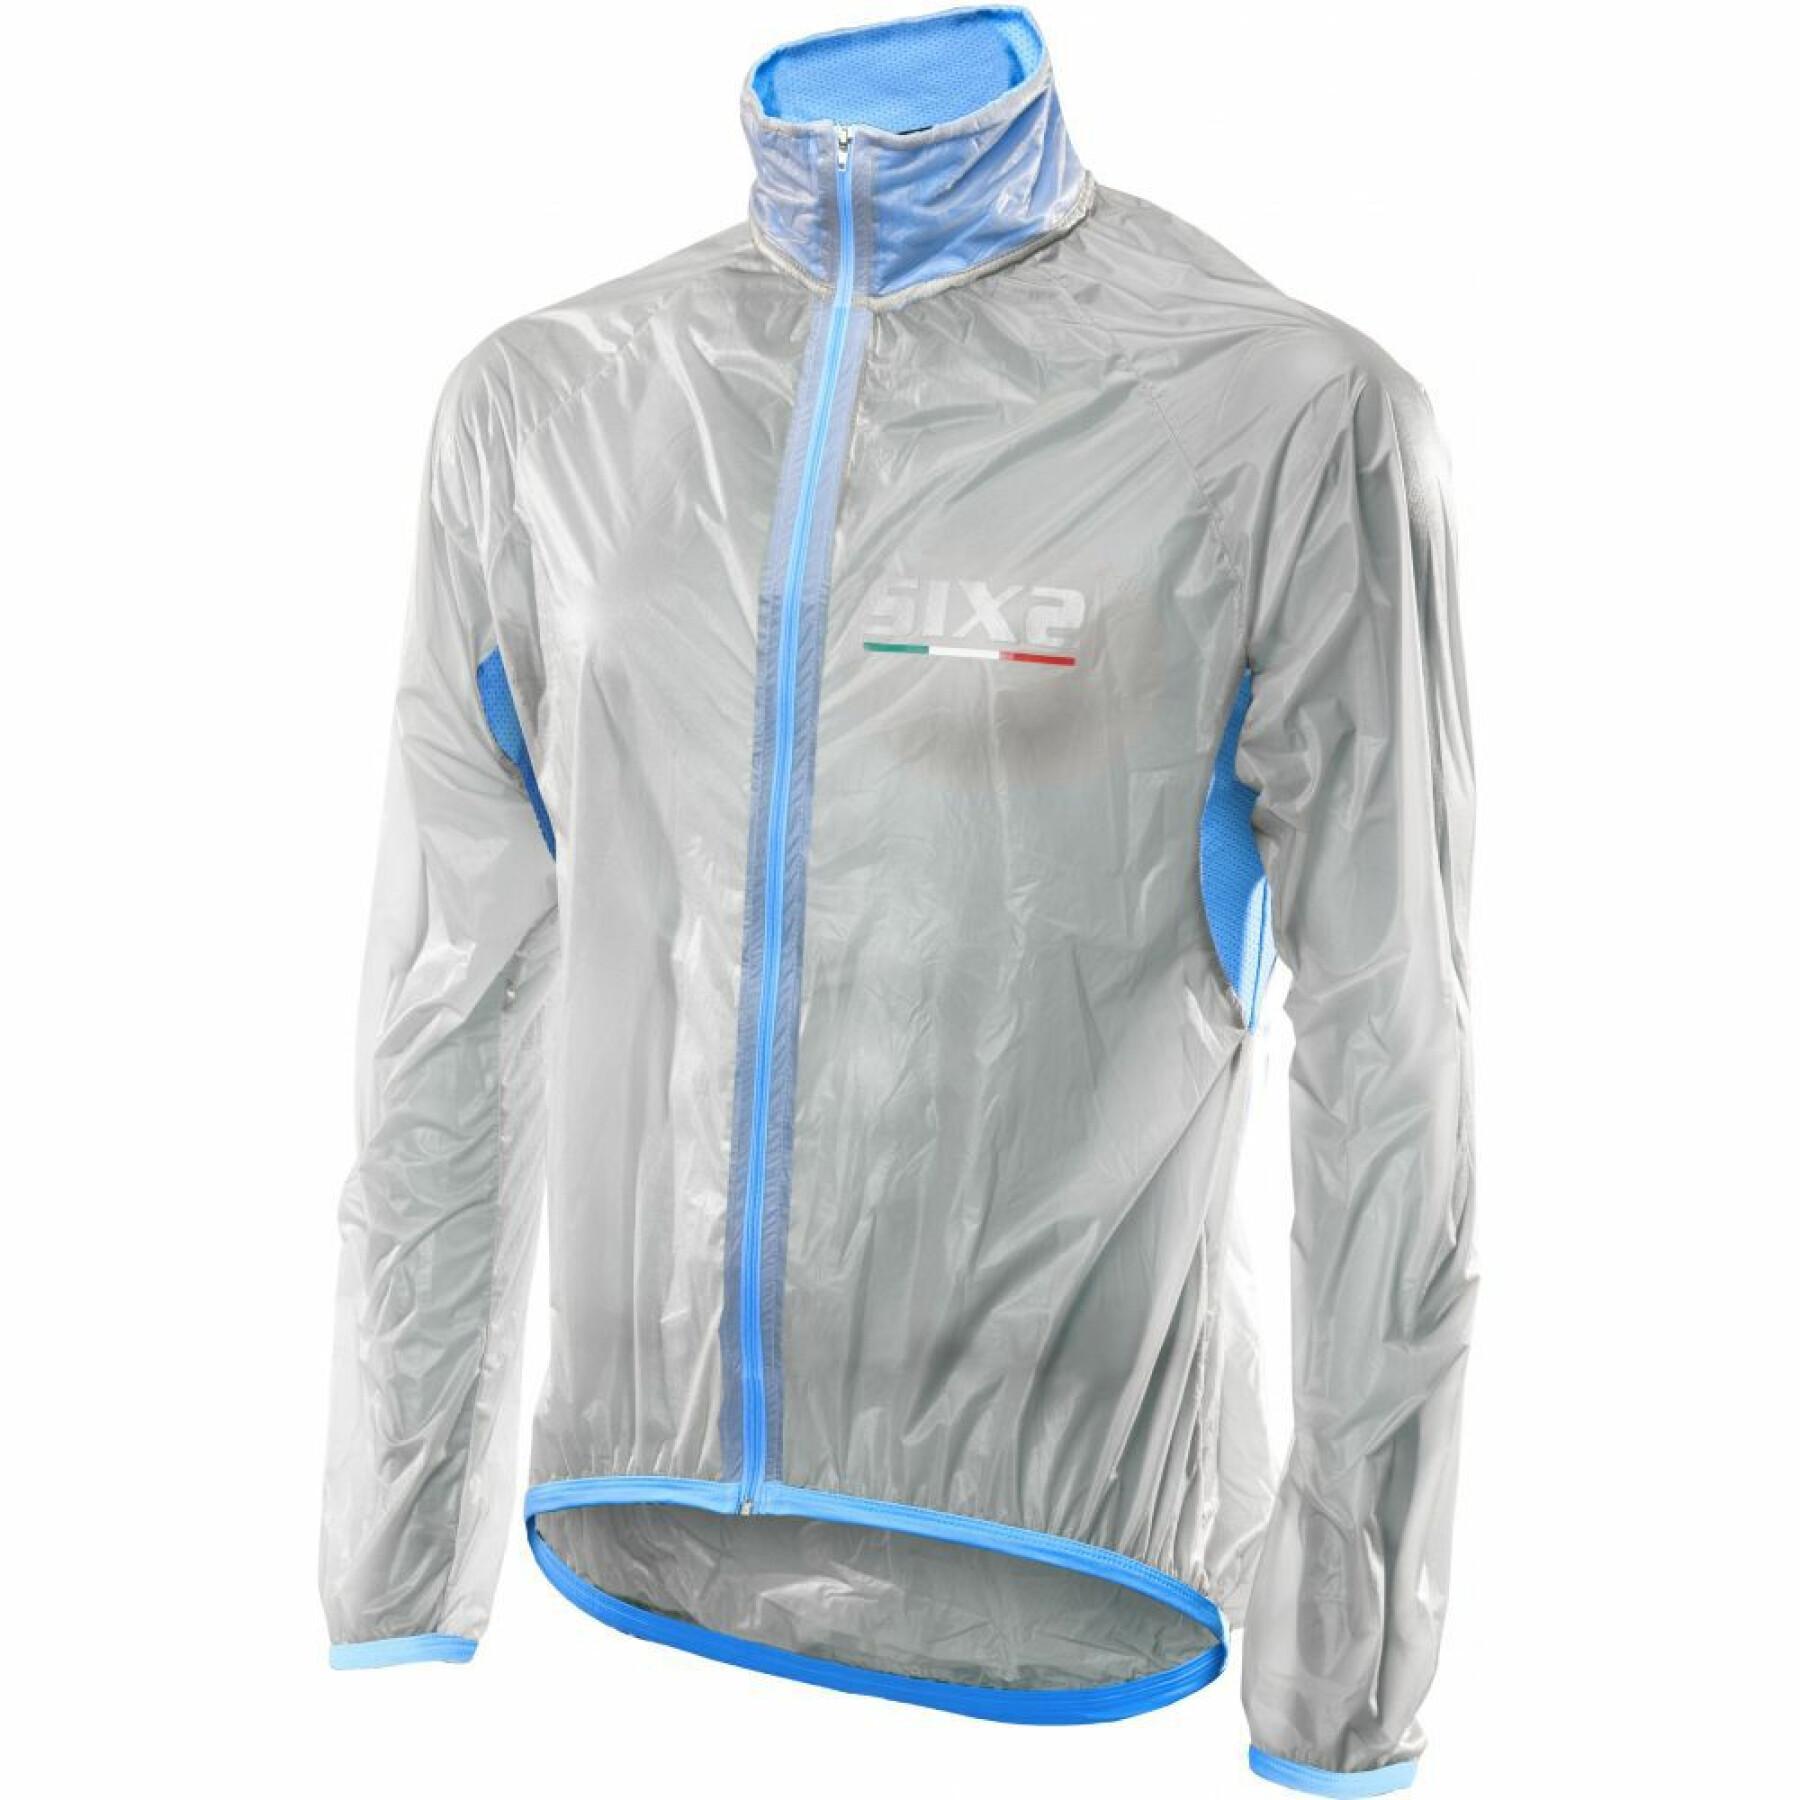 Windproof jacket Sixs Ghost